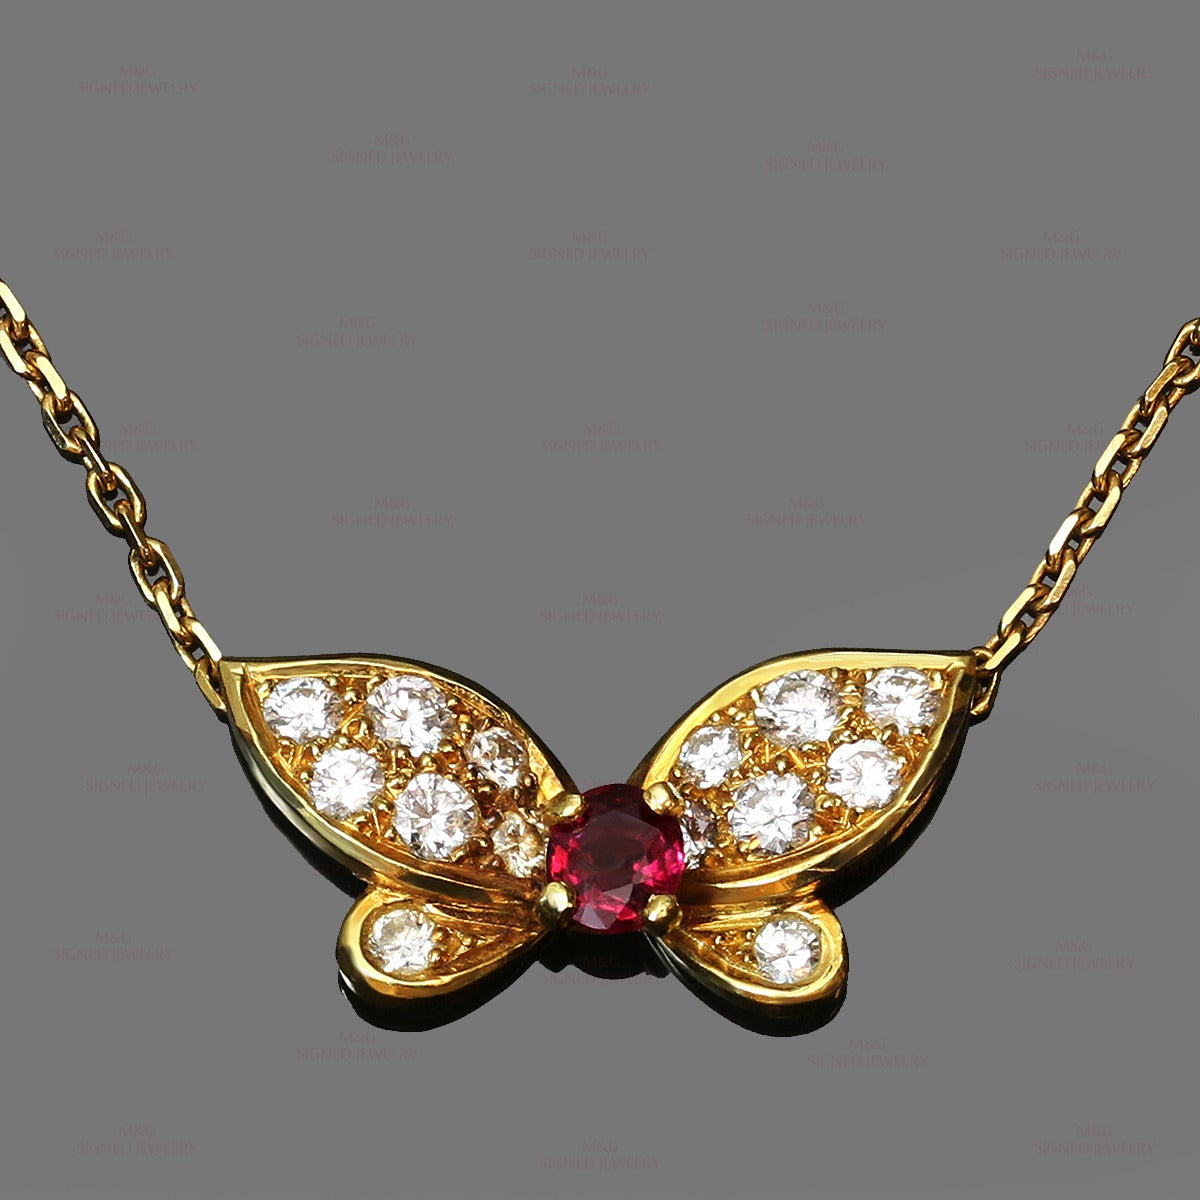 This stunning Van Cleef & Arpels necklace is made in 18k yellow gold and set a round faceted red ruby of an estimated 0.38 carats and round brilliant-cut D-F VVS1-VVS2 diamonds of an estimated 0.55 carats. Made in France circa 1990s. Measurements: